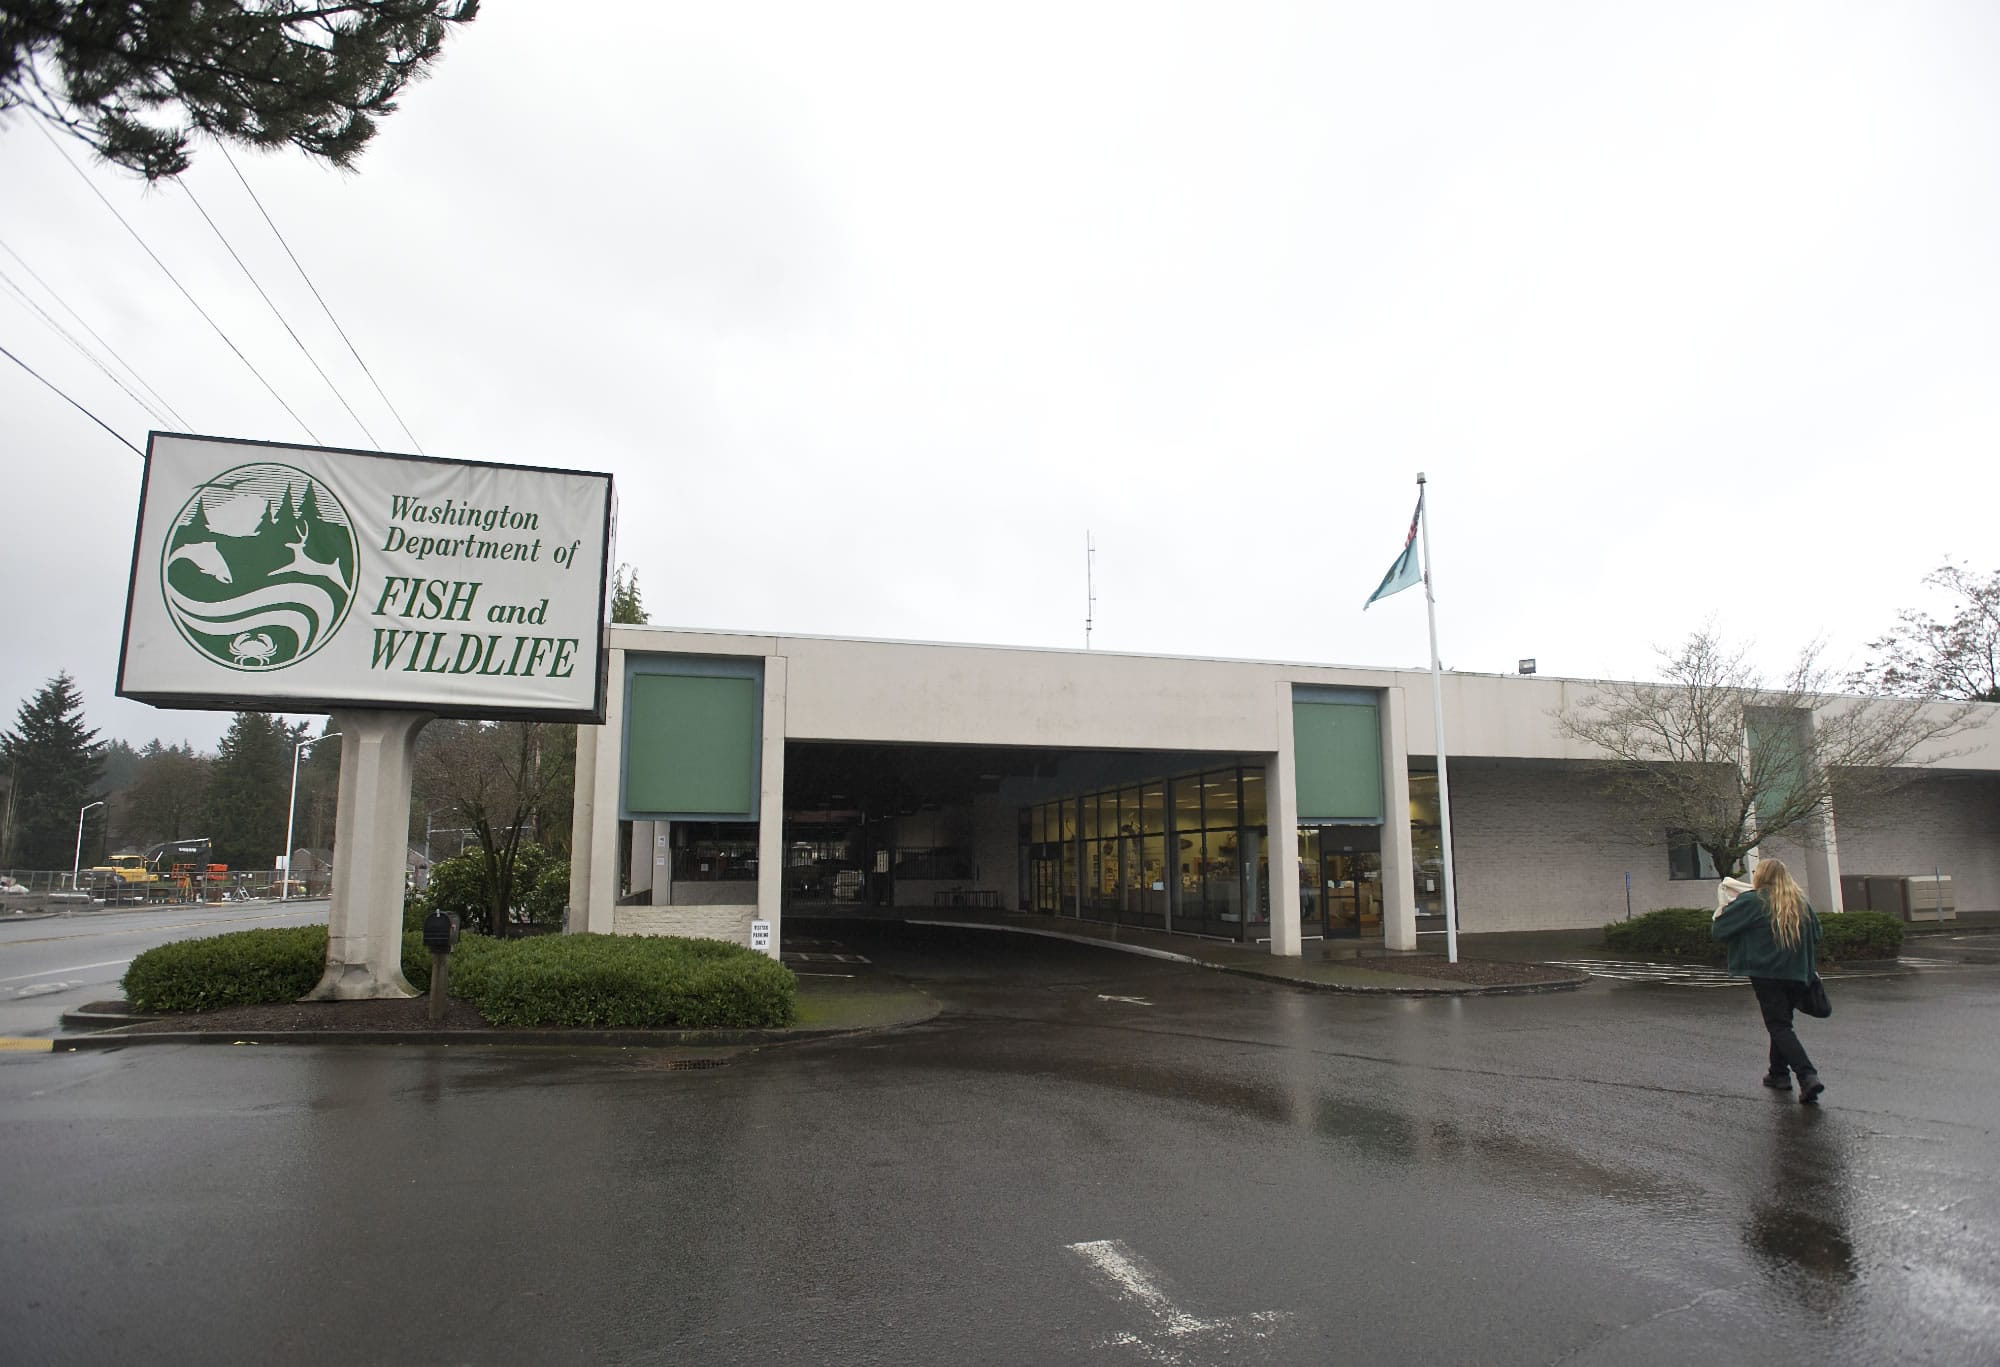 The Department of Fish and Wildlife Southwest Washington regional office moved to the Port of Ridgefield in 2016, leaving the building on Grand, seen here in 2013, empty. The city of Vancouver plans to turn it into a day center for the homeless.